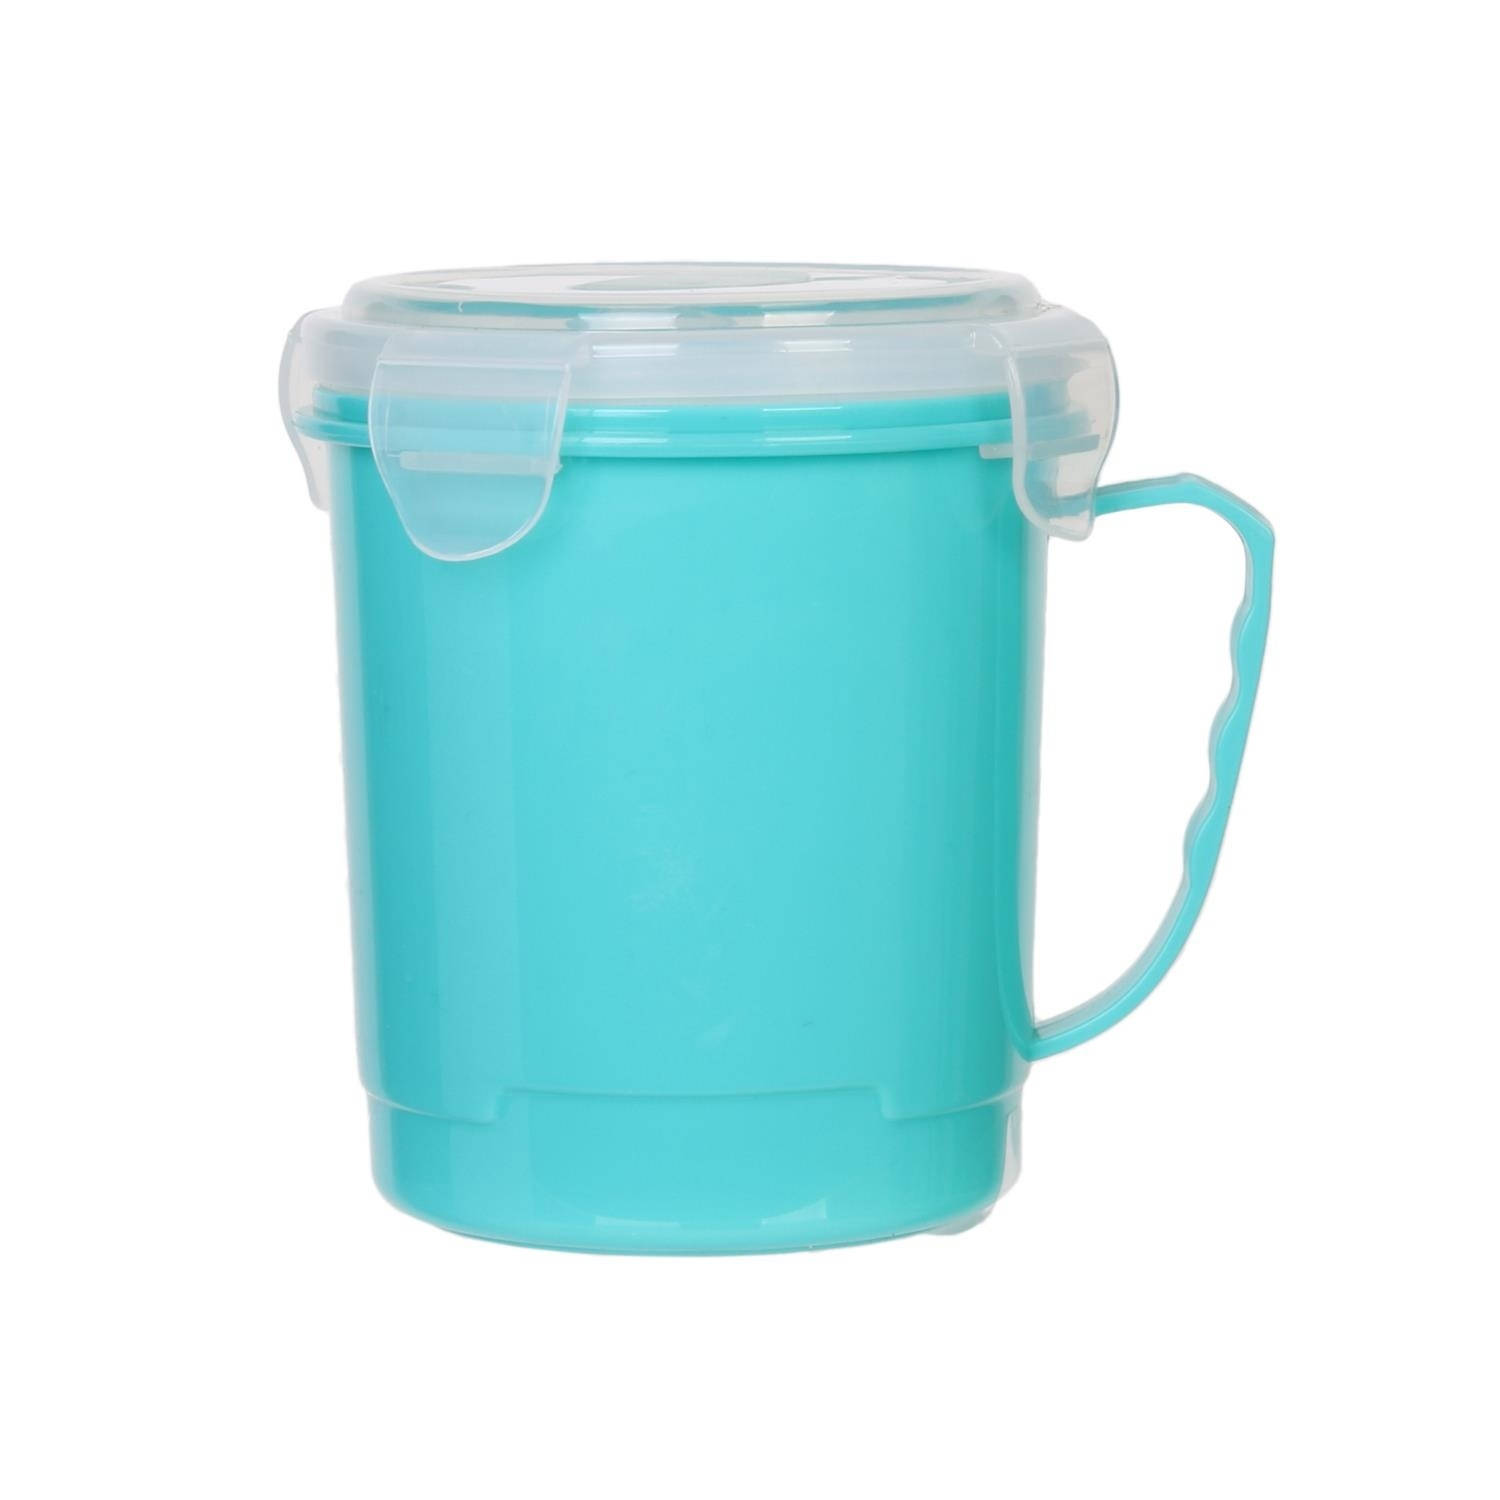 Cook Concept Magnetron soepbeker - Turquoise